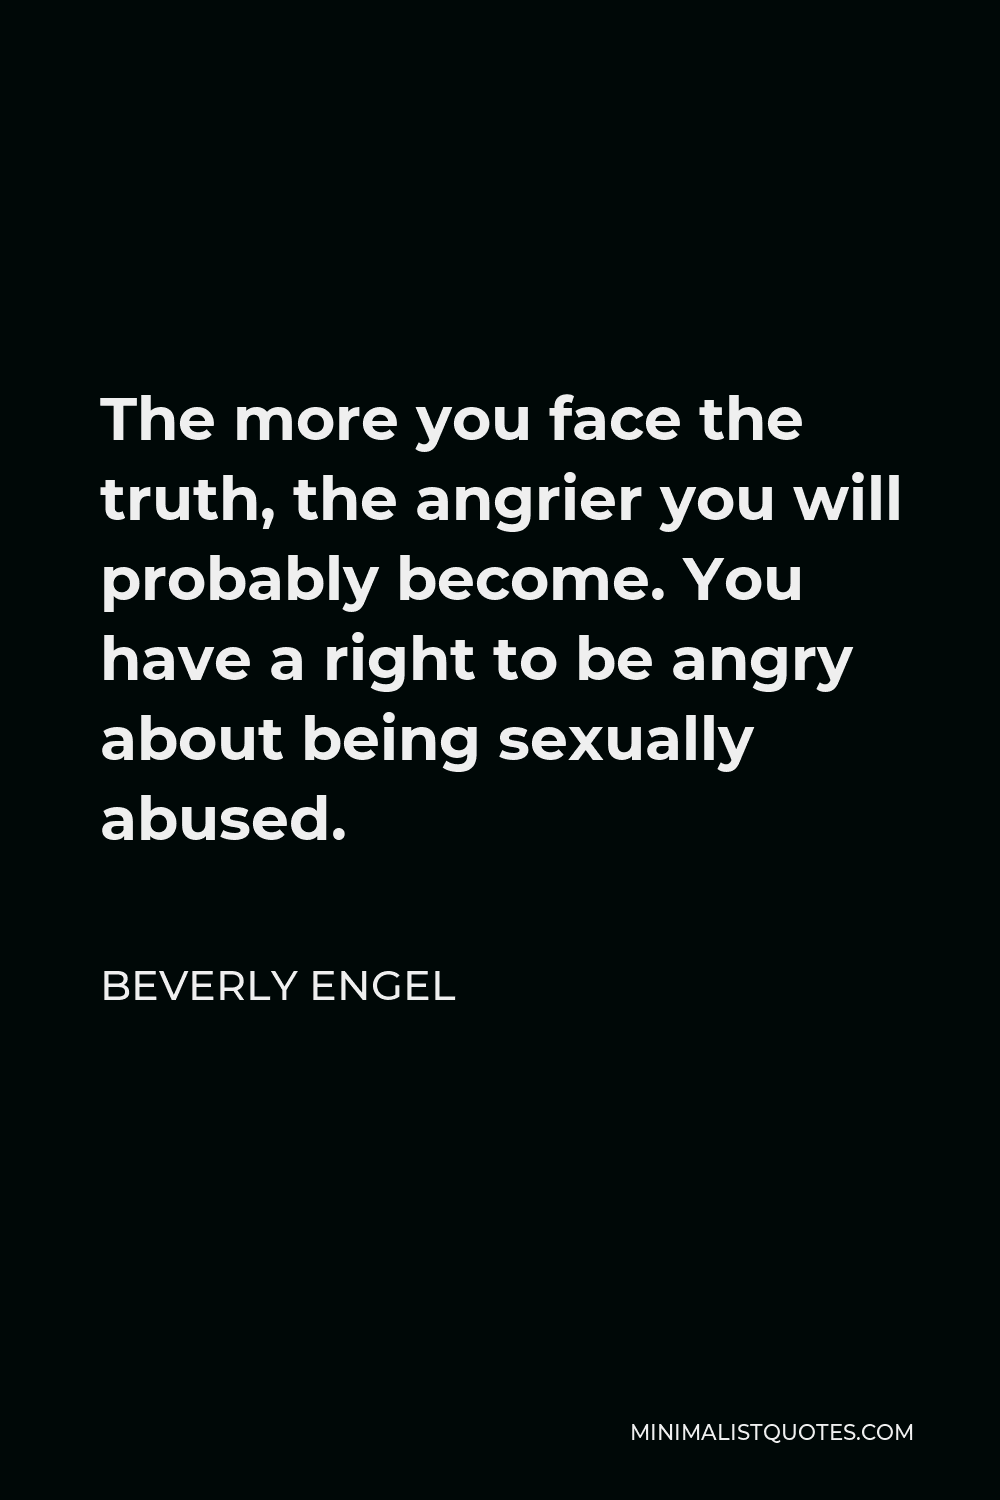 Beverly Engel Quote - The more you face the truth, the angrier you will probably become. You have a right to be angry about being sexually abused.